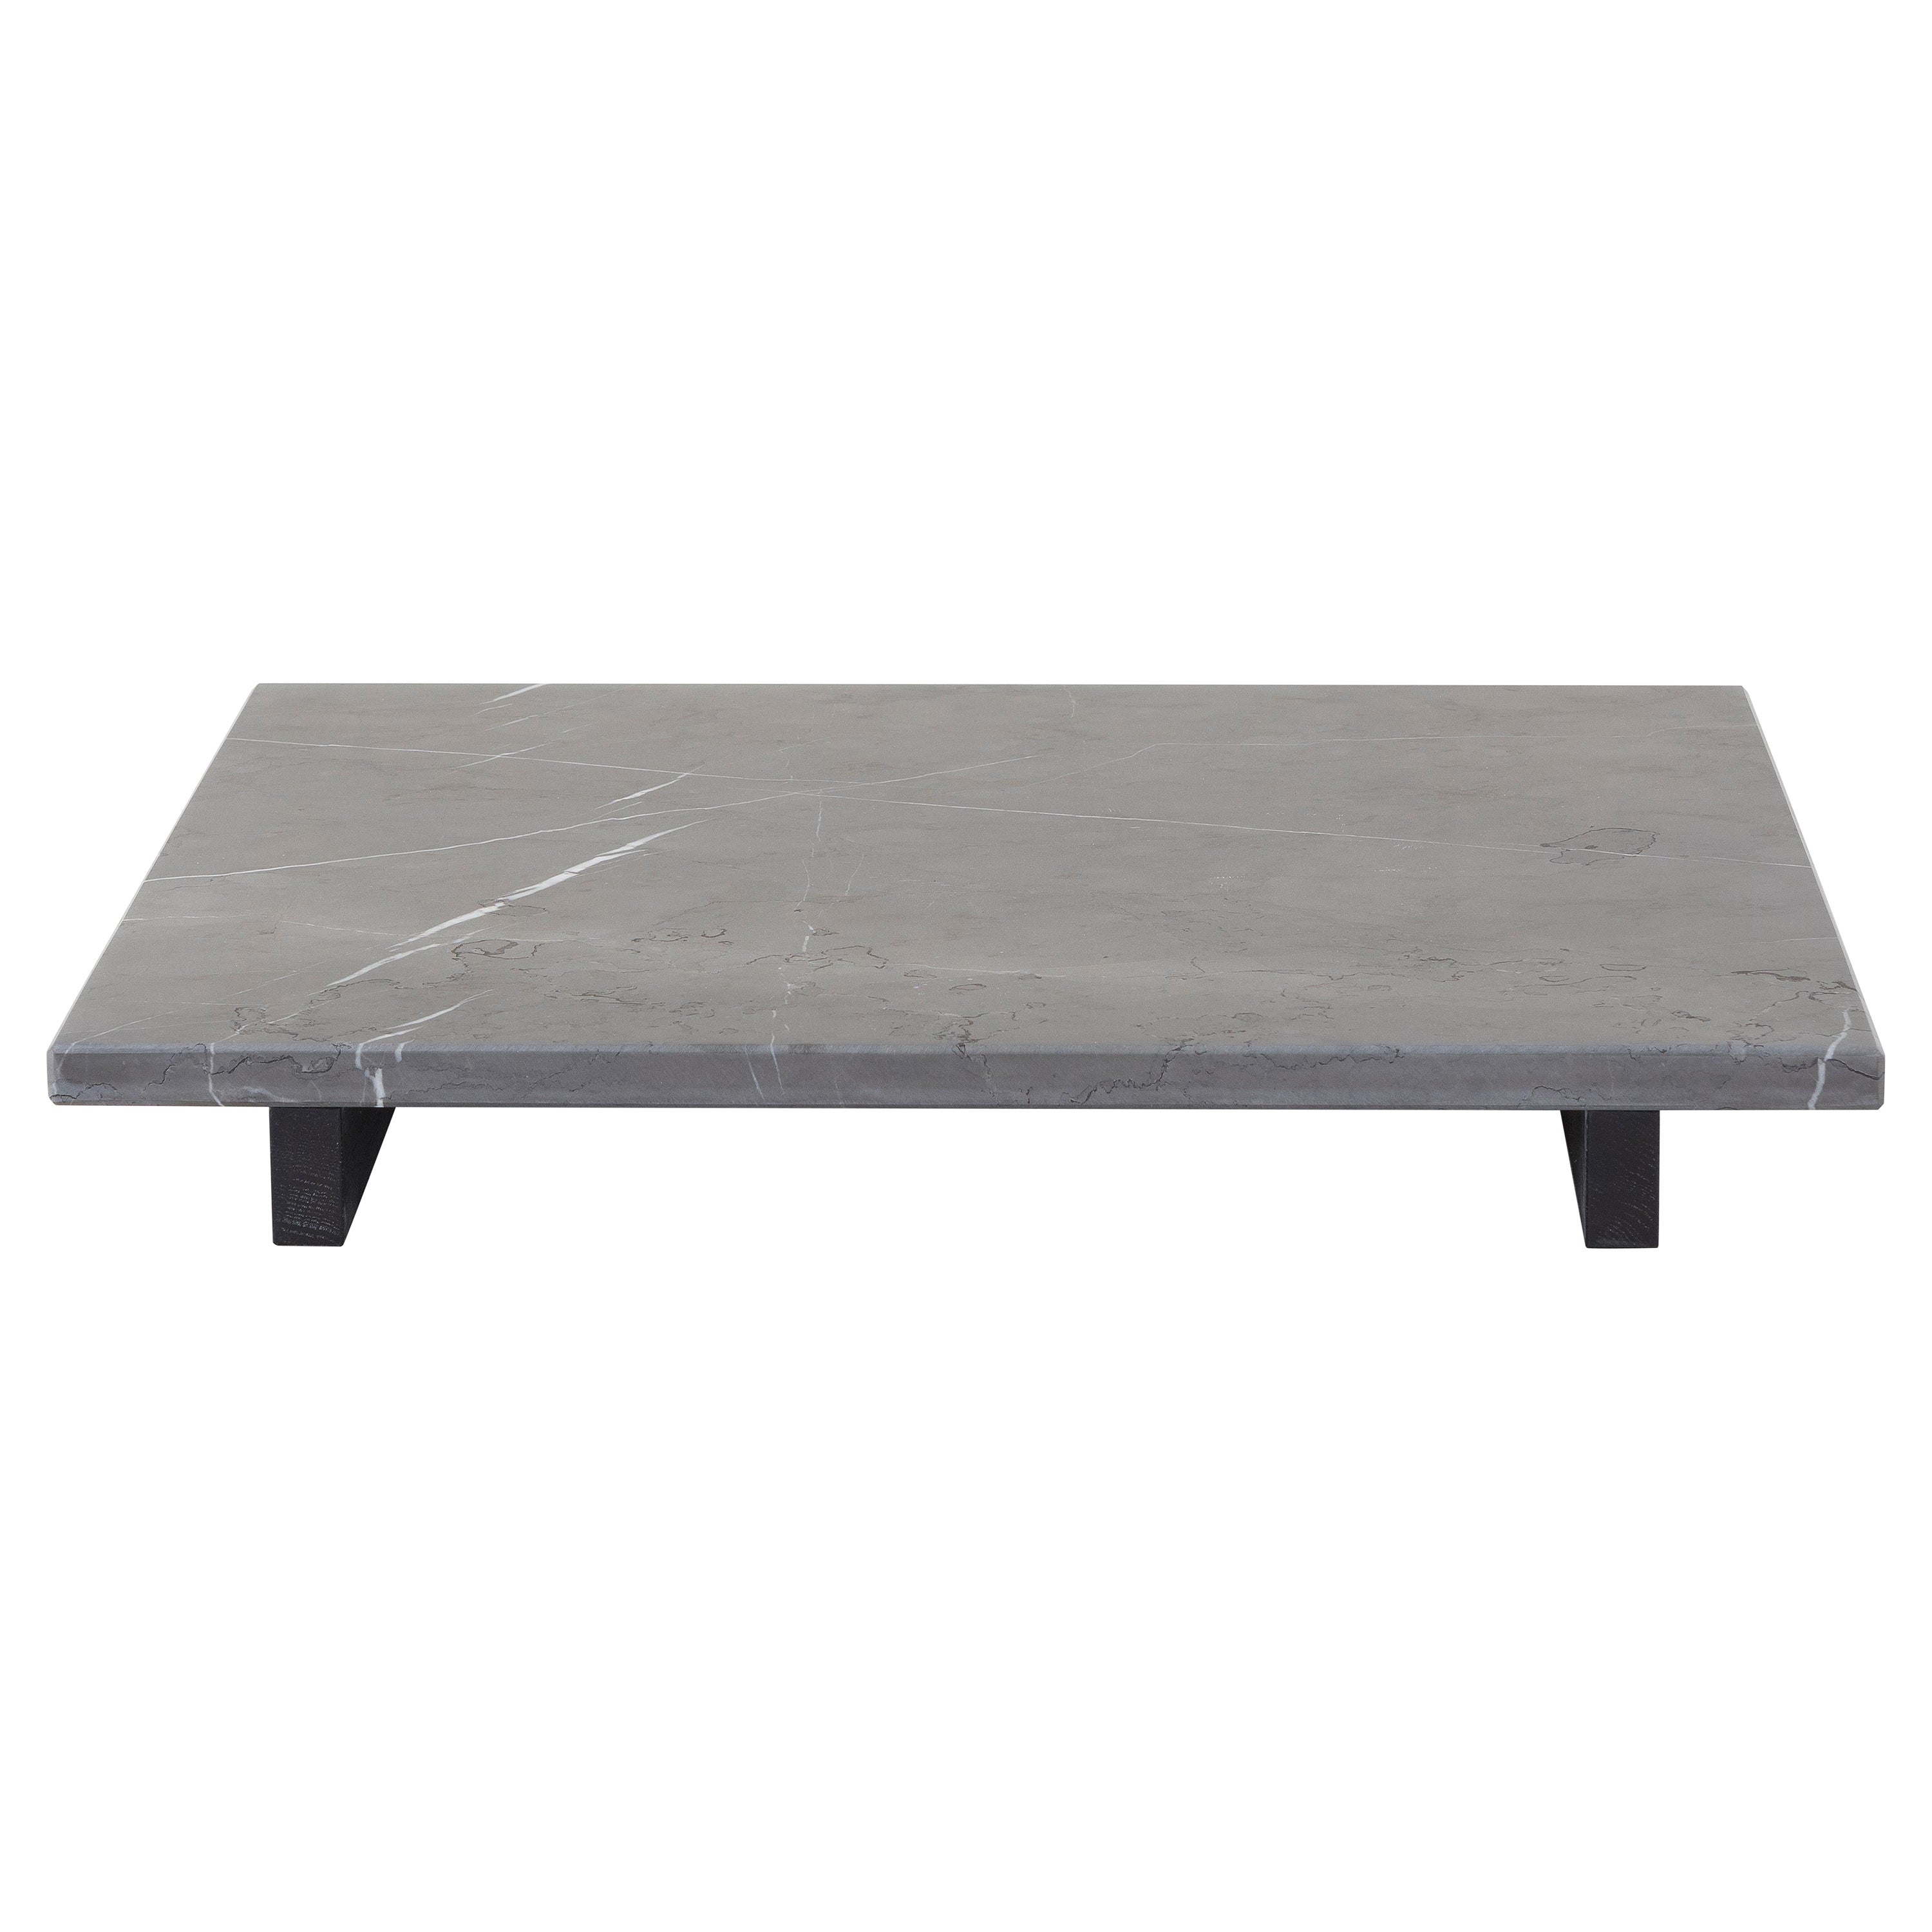 Amura 'Tau' Coffee Table in Grafite Marble by Emanuel Gargano For Sale